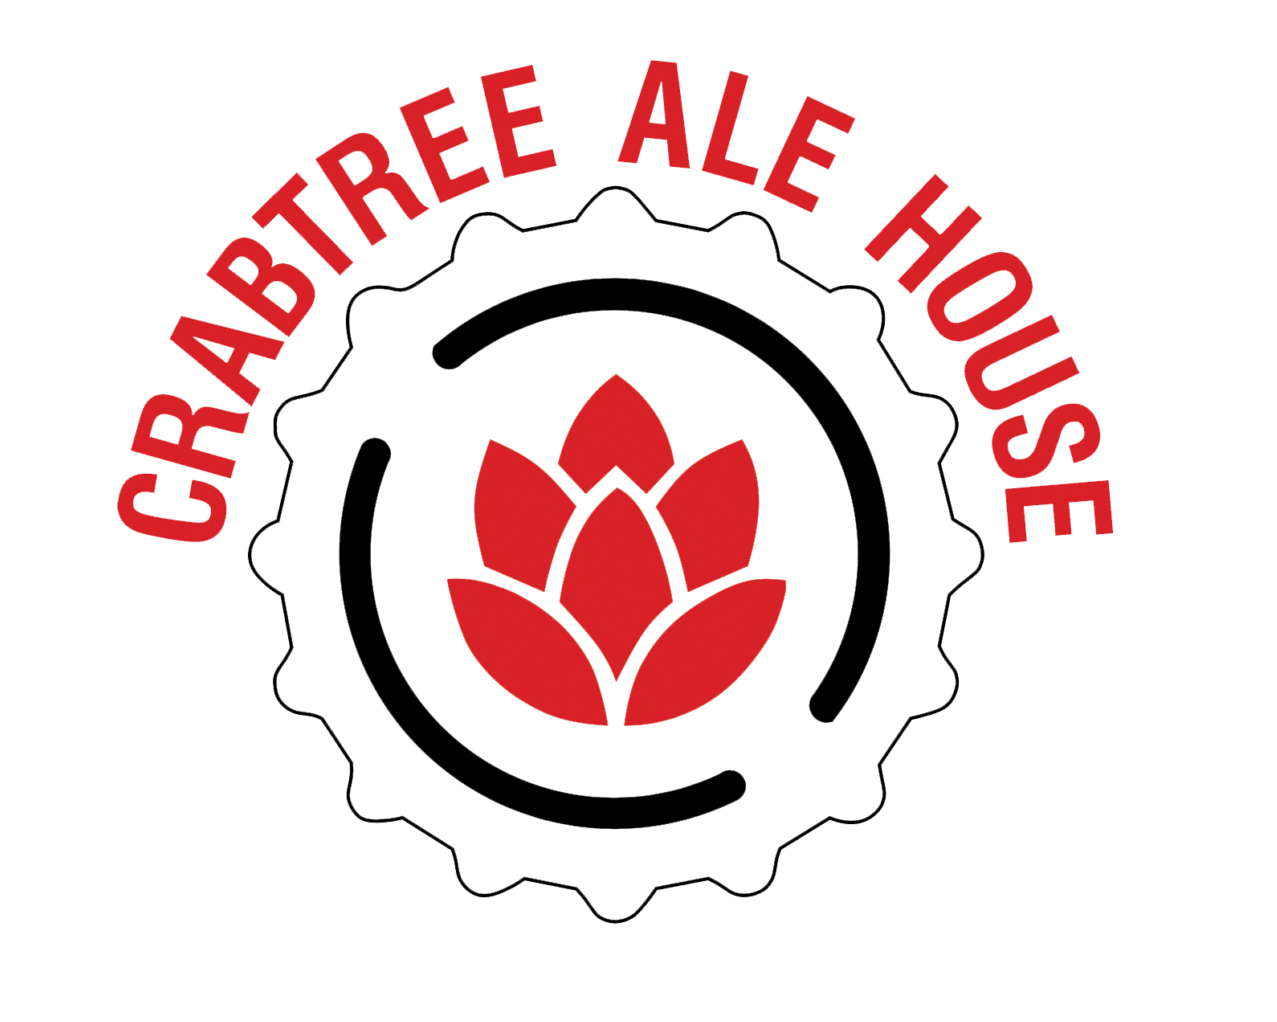 Crabtree Ale House